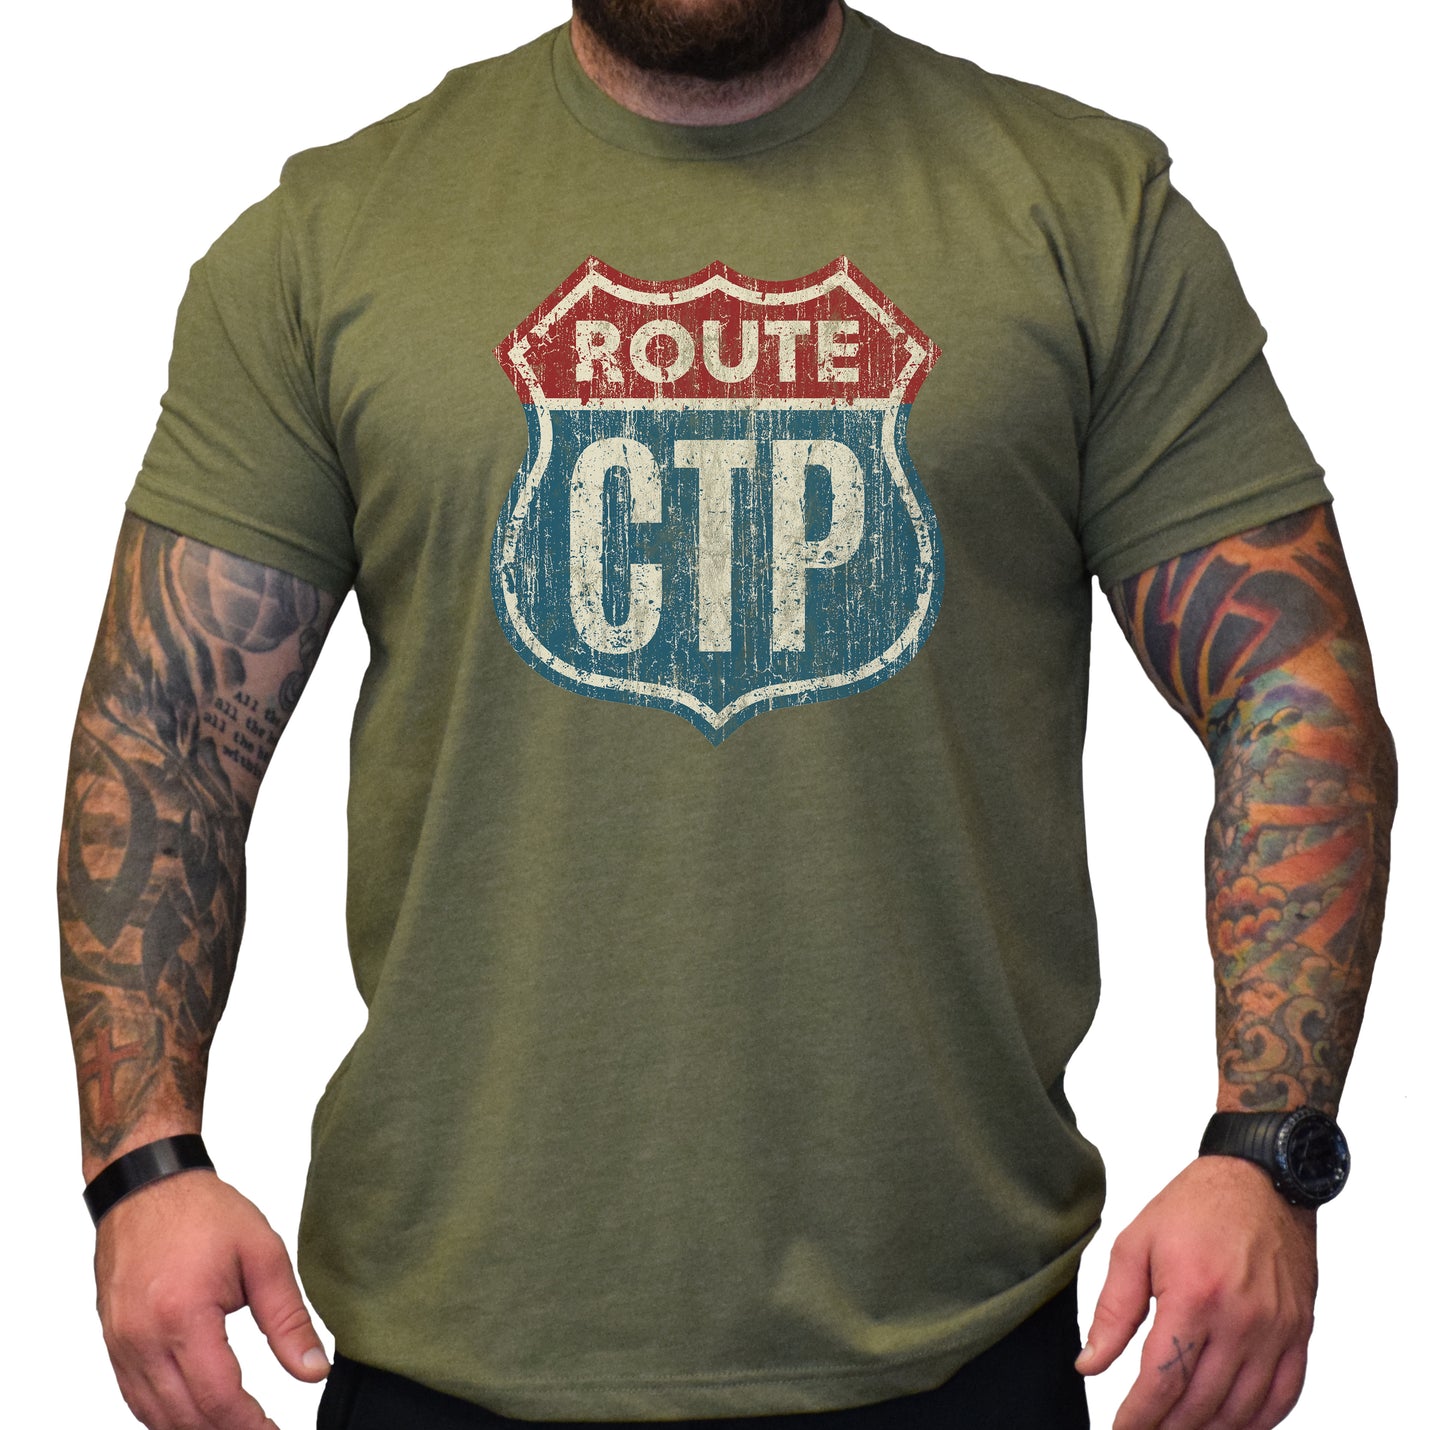 Route CTP Chive Men's Shirt